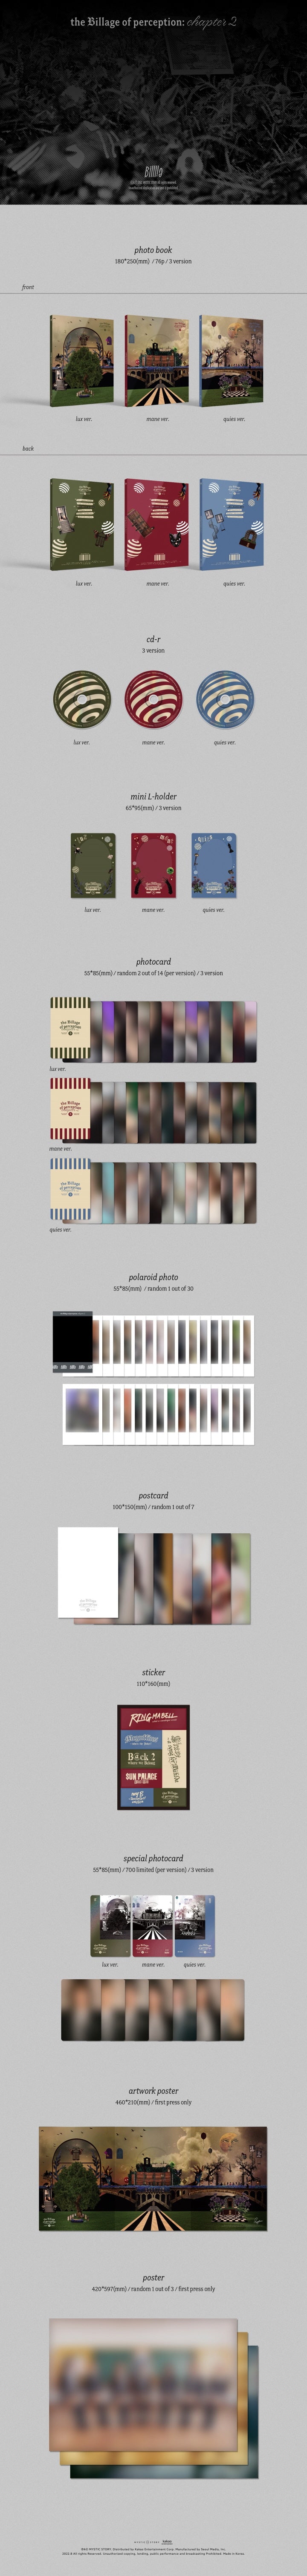 1 CD
1 Photo Book (76 pages)
1 Mini L-holder
2 Photo Cards (random out of 14 types)
1 Polaroid Photo (random out of 30 typ...